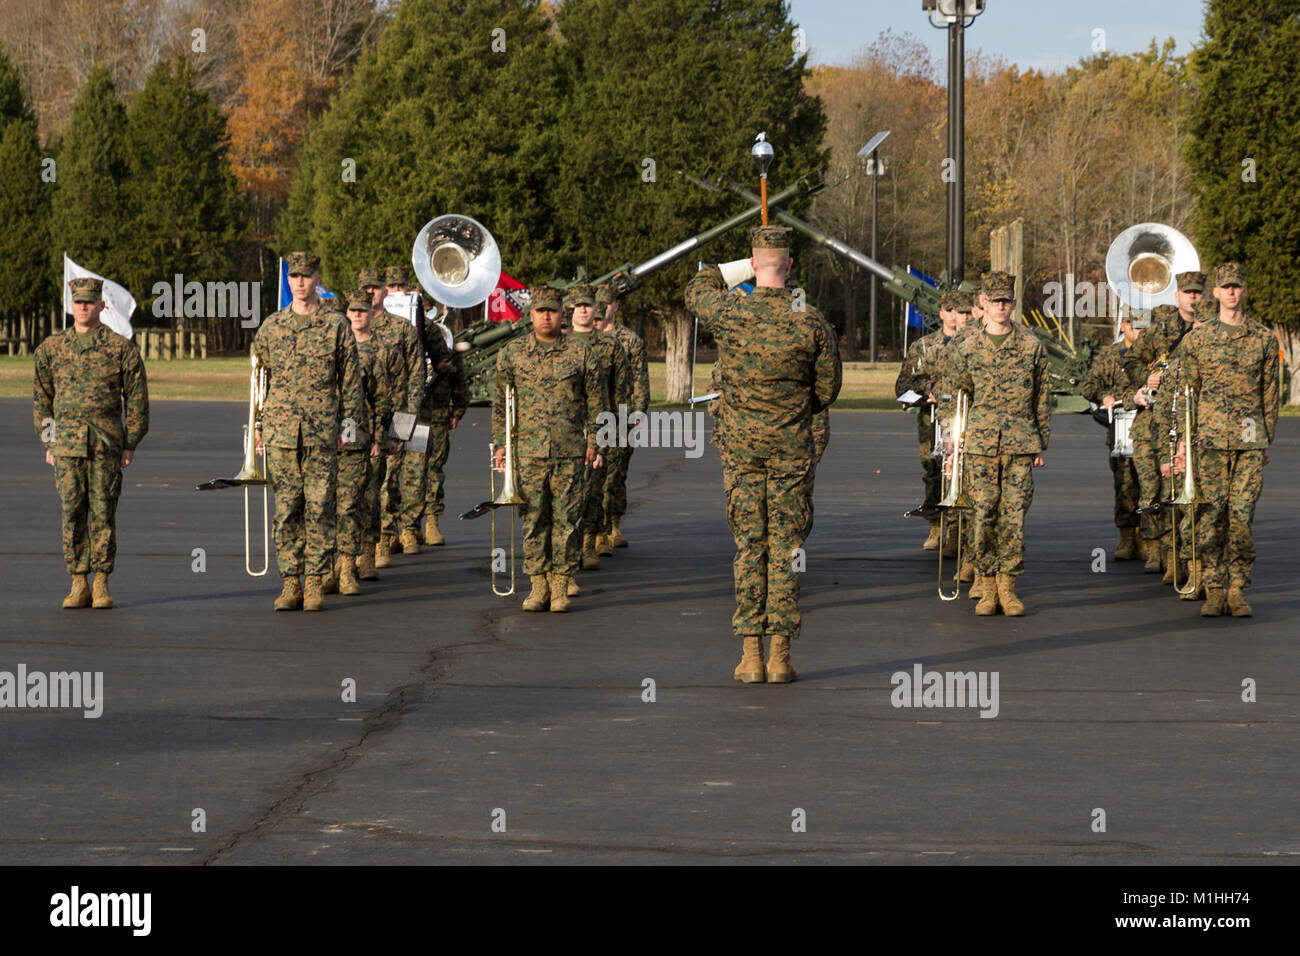 The Quantico Marine Band performs before the start of the Officer Candidate School (OCS) graduation ceremony at Marine Corps Base Quantico, Va., Nov. 18, 2017. Candidates of class 226 graduate from OCS after completing 10 weeks of intensive training to evaluate and screen individuals for the leadership, moral, mental, and physical qualities required for commissioning as a Marine Corps officer. (U.S. Marine Corps Stock Photo